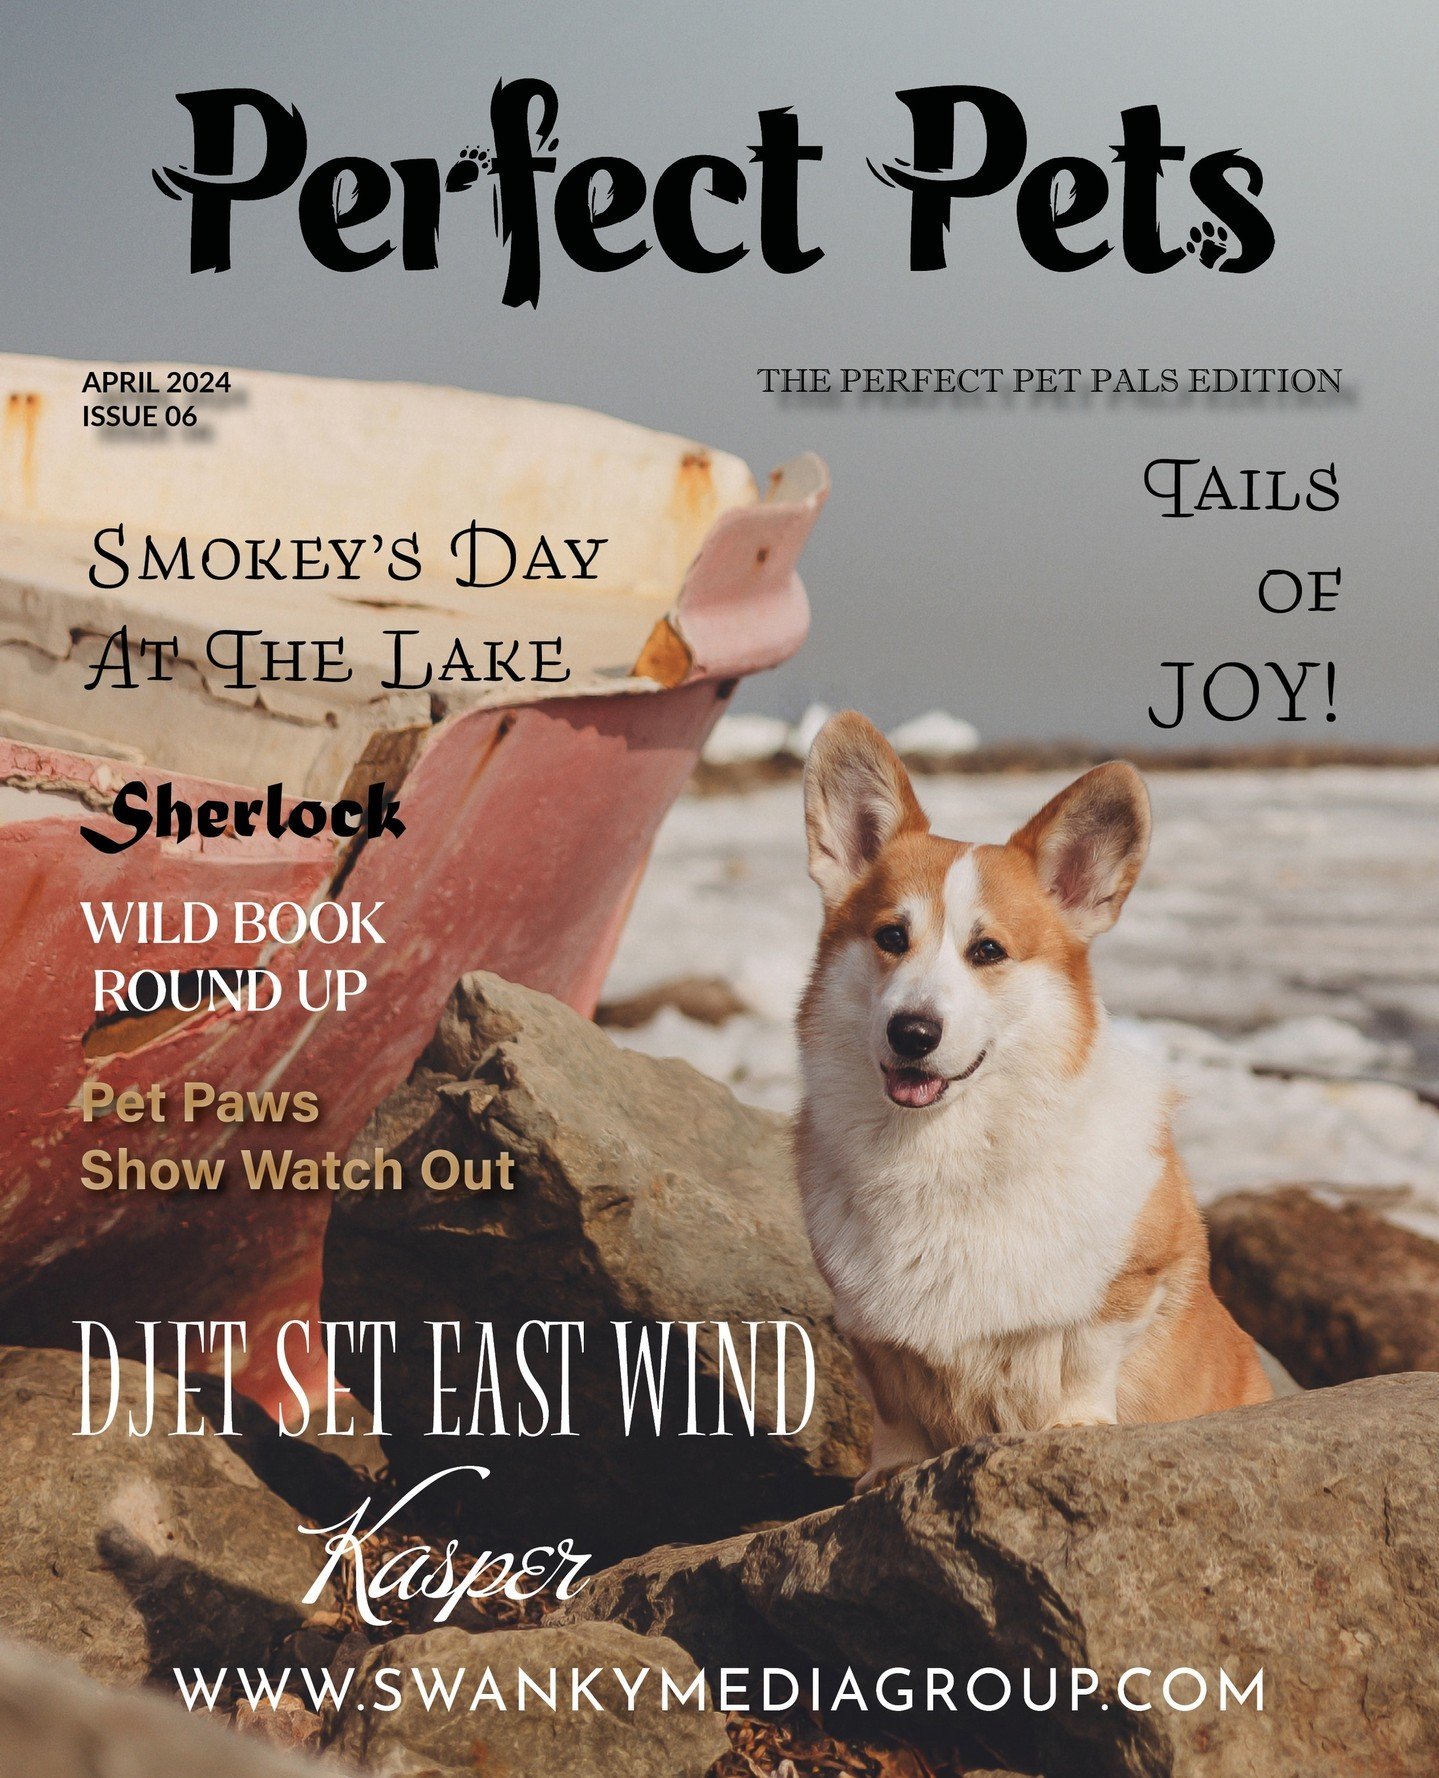 OUR APRIL ISSUES HAVE ARRIVED 🌊⁠
⁠
Perfect Pets Magazine - April 2024: The Perfect Pets Pals Edition Issue 6⁠
⁠
This month, our Editor-in-chief, Lucy Morris (@lucyjanemedia), discusses the theme of the spring season, focusing on its relevance to pet